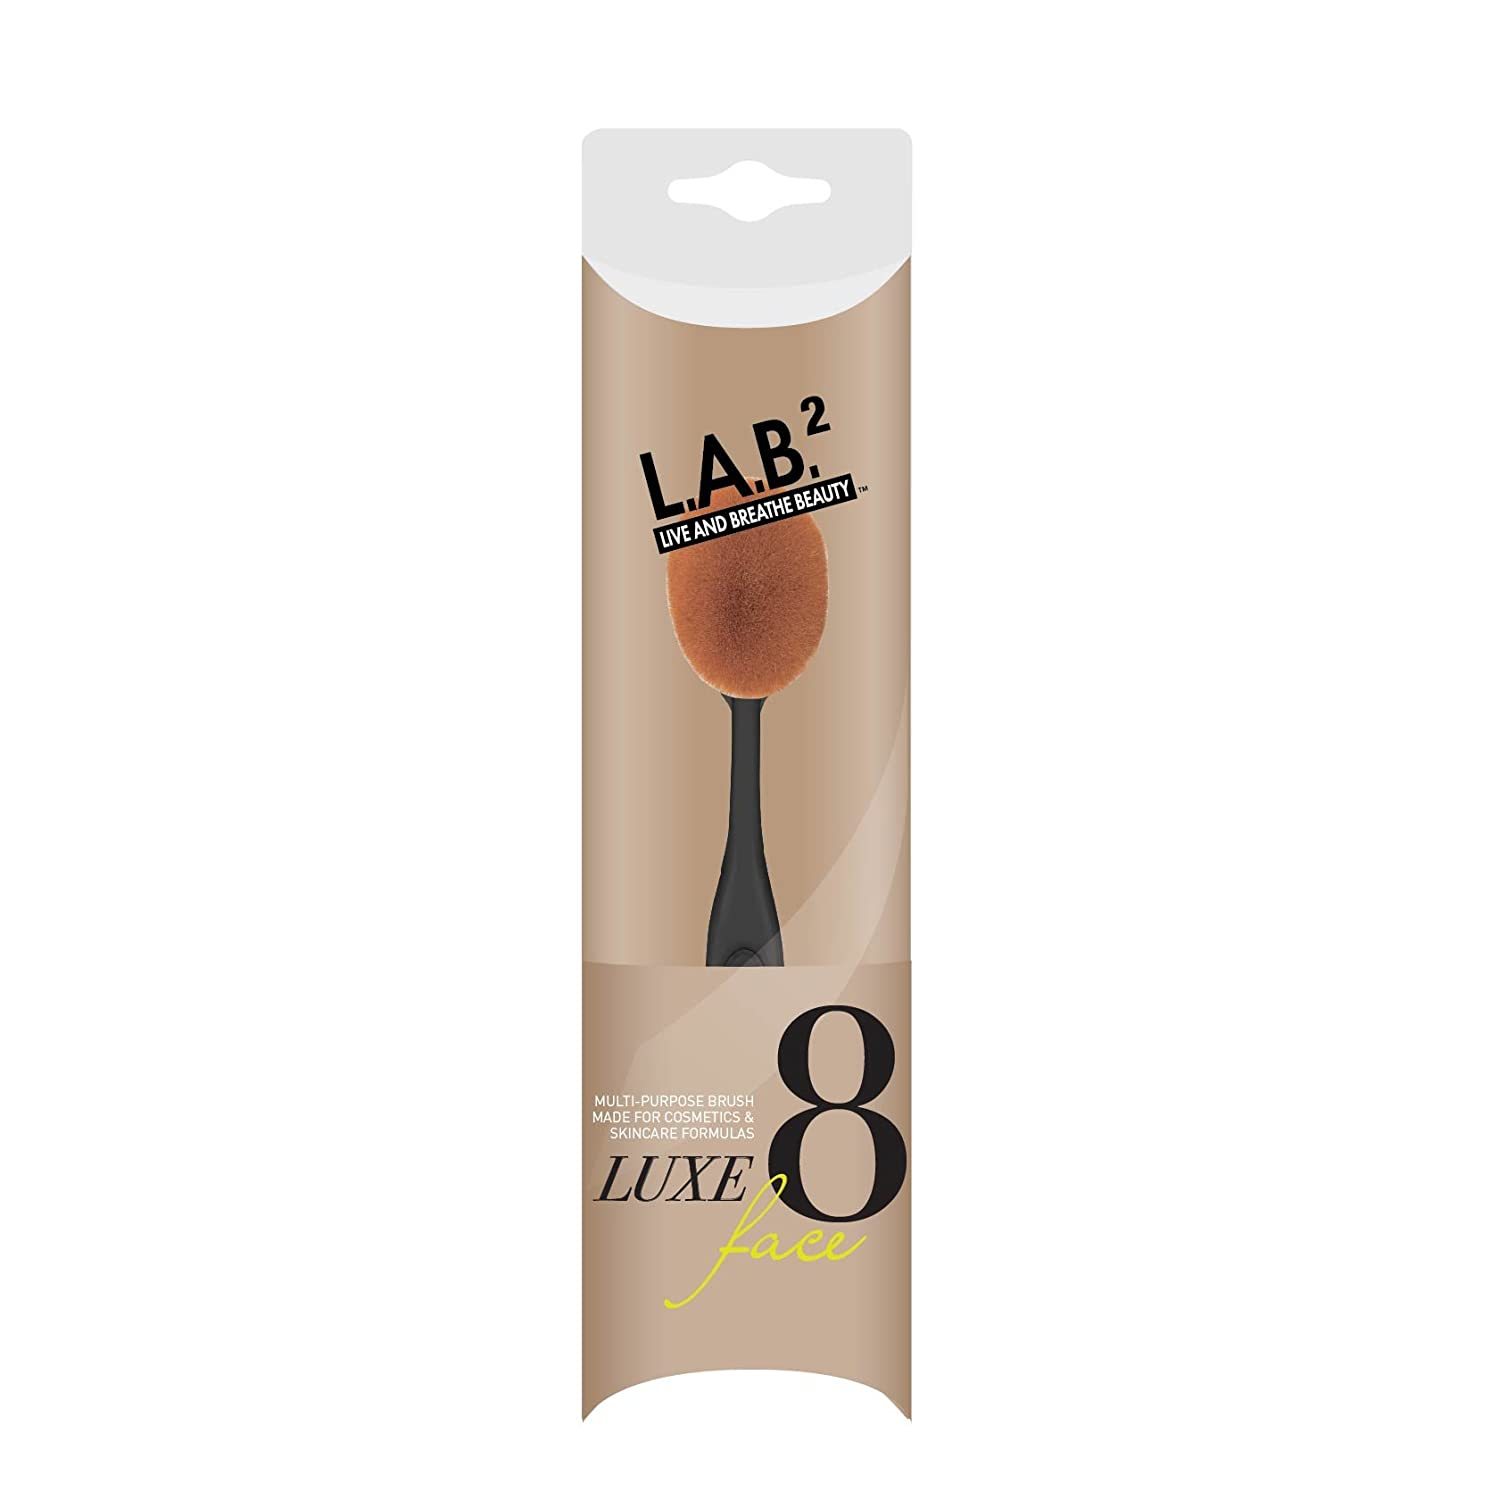 New Luxe Oval Makeup & Care Brush, No. 8 For Face,Black,2.15 Ounce,01-4114